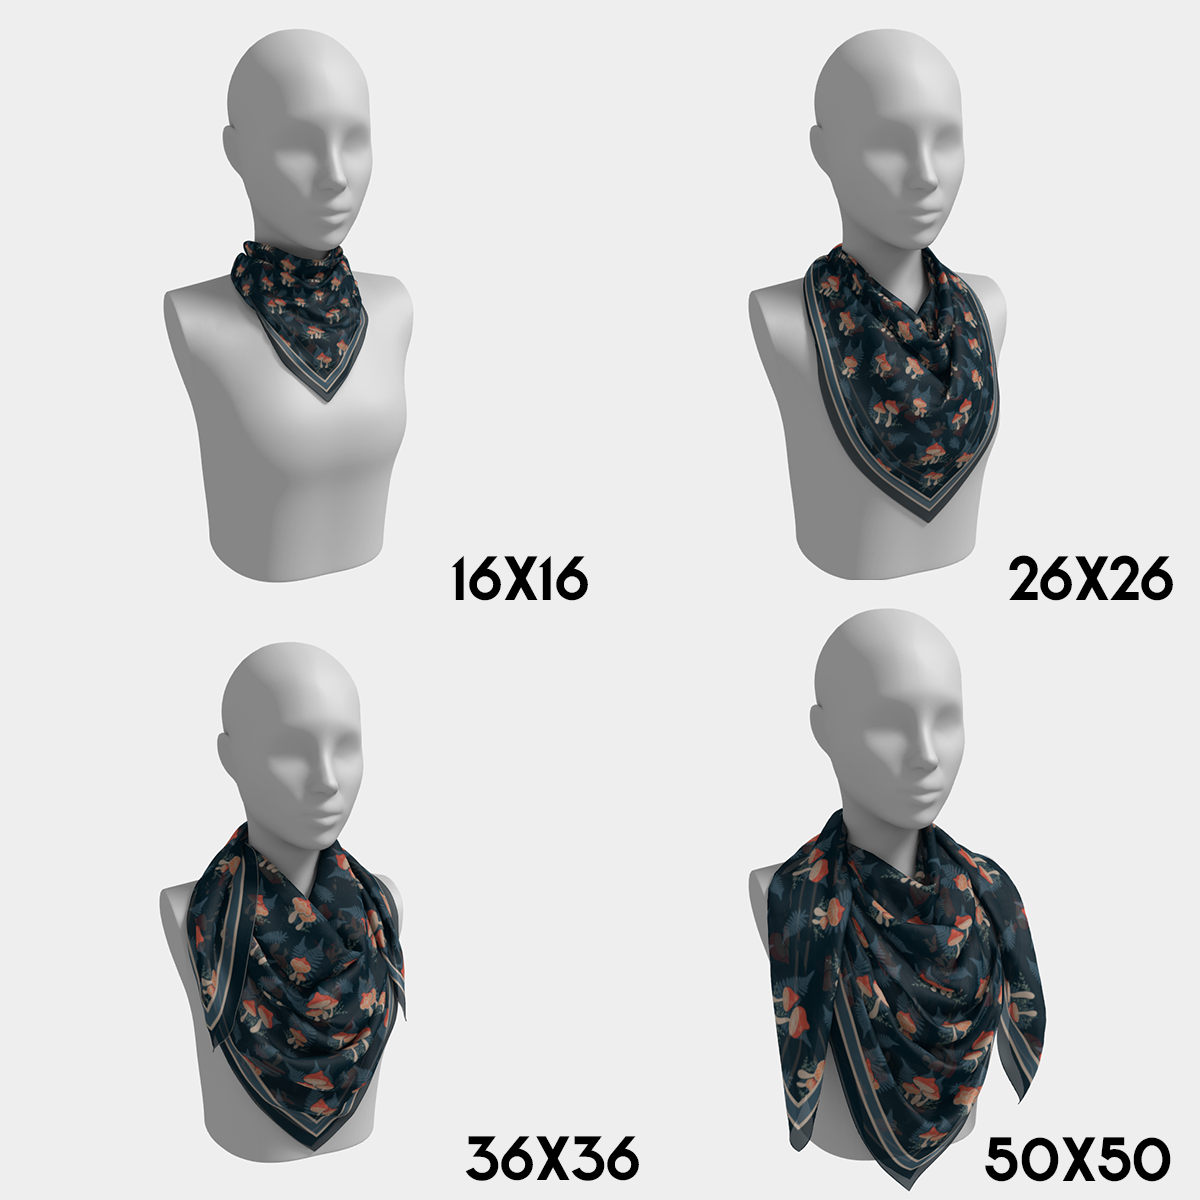 Chart showing difference in scarf sizes